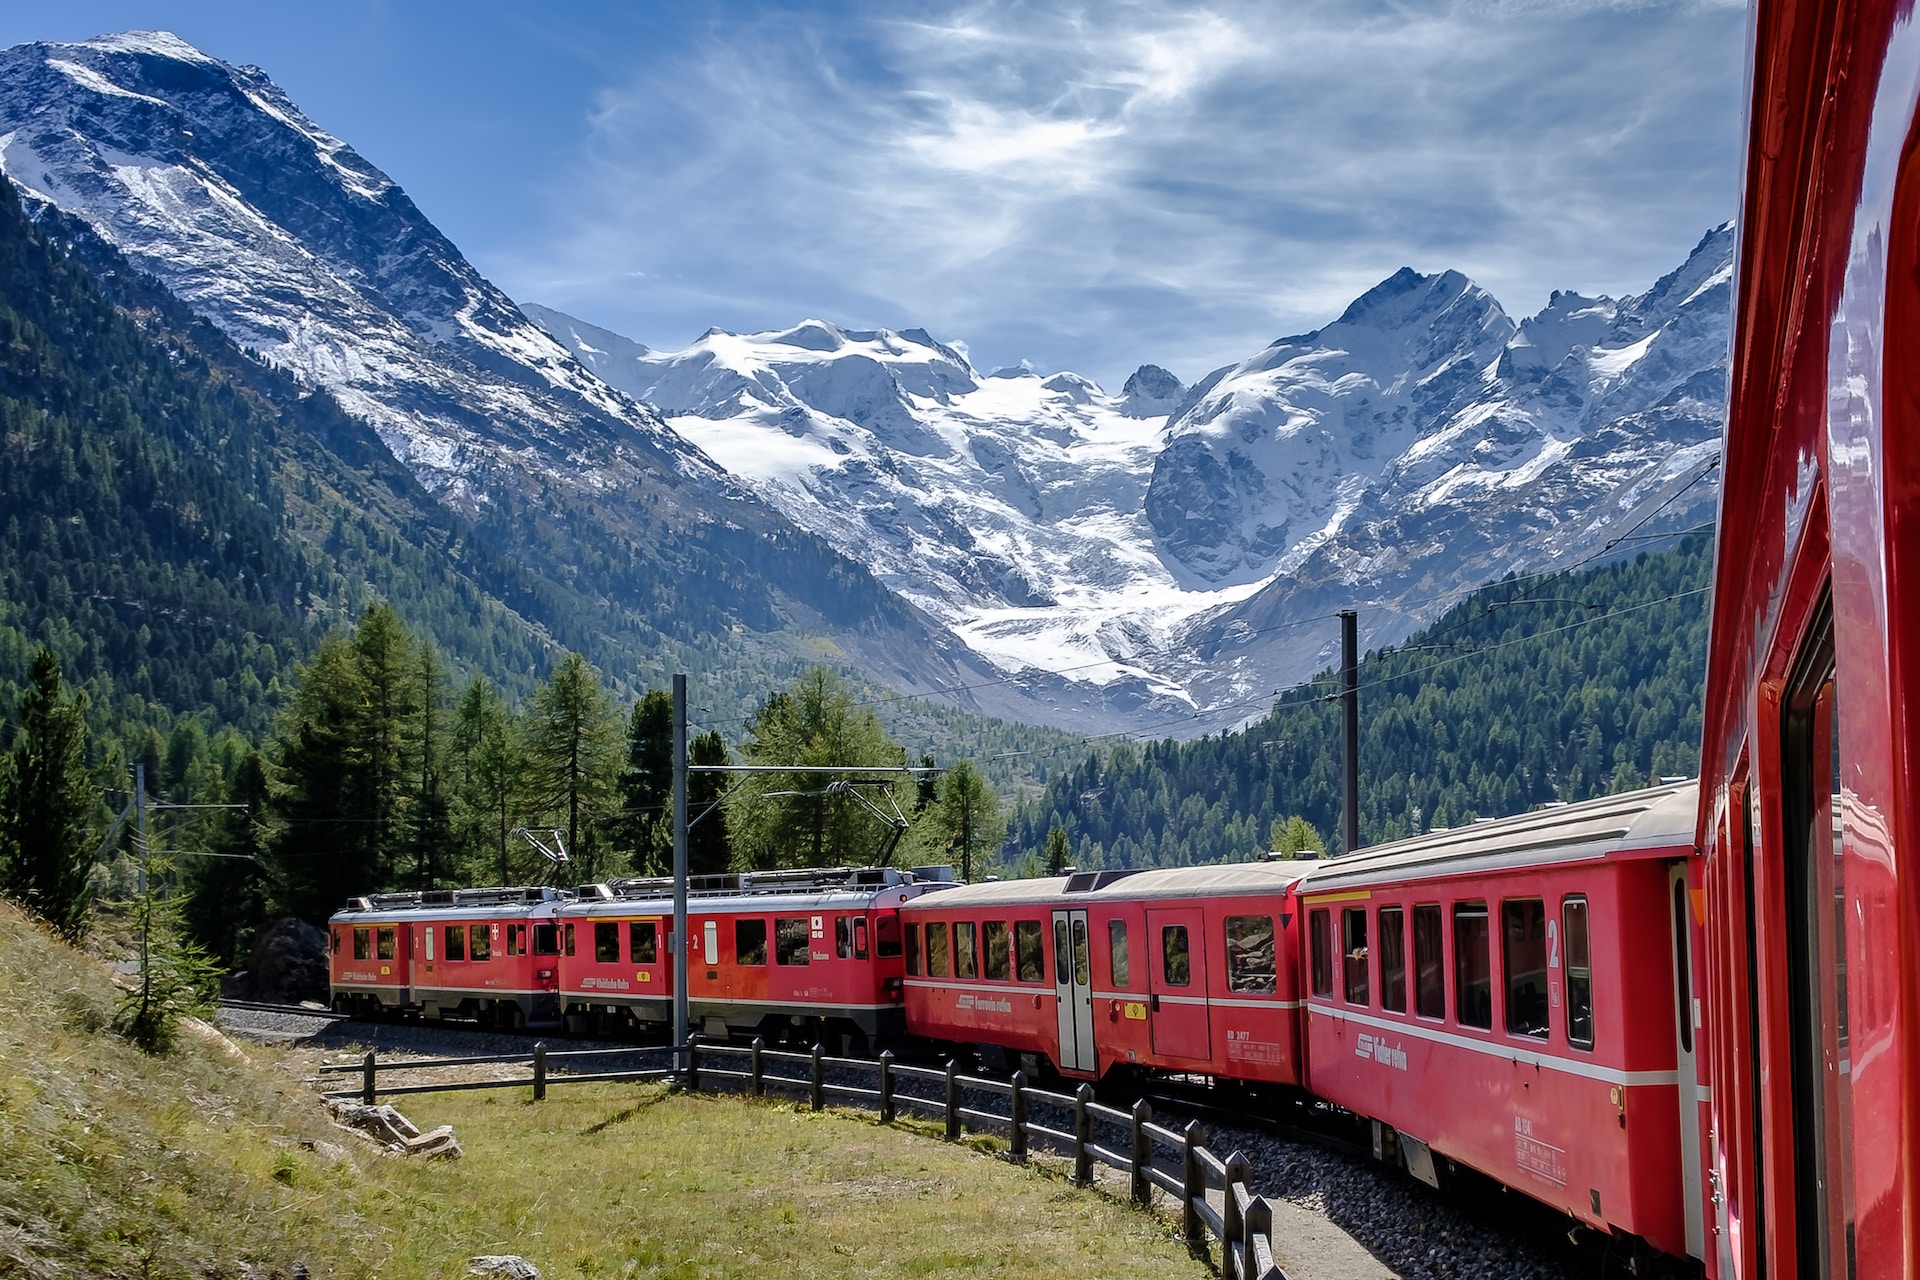 View from a carriage on the Glacier Express as it approaches the Swiss Alps